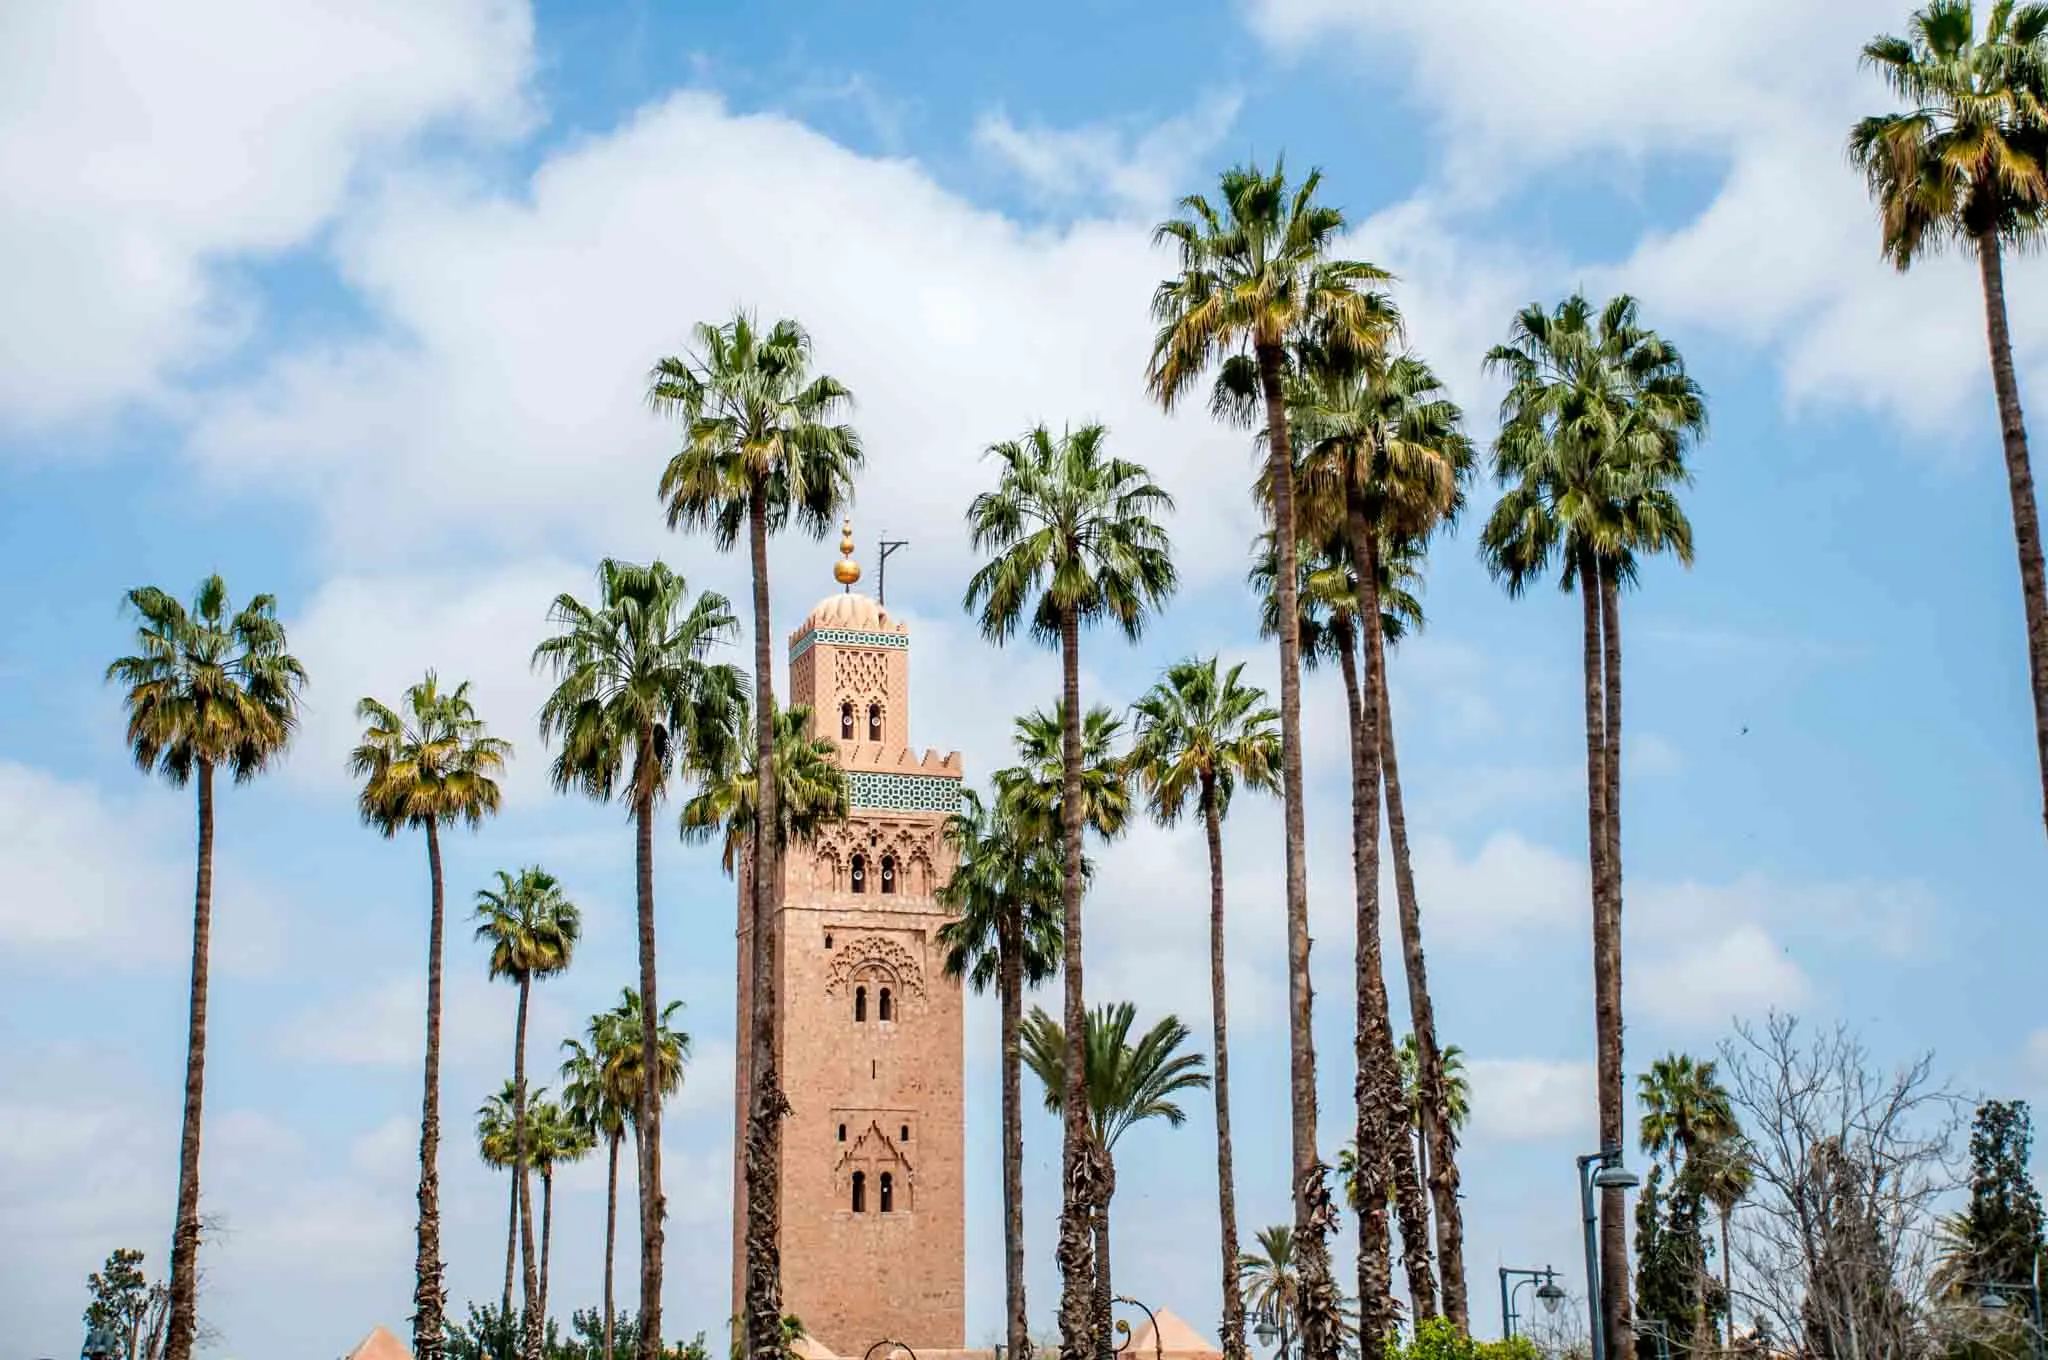 Visiting sites like the Koutubia in Marrakech are a fun part of Morocco travel